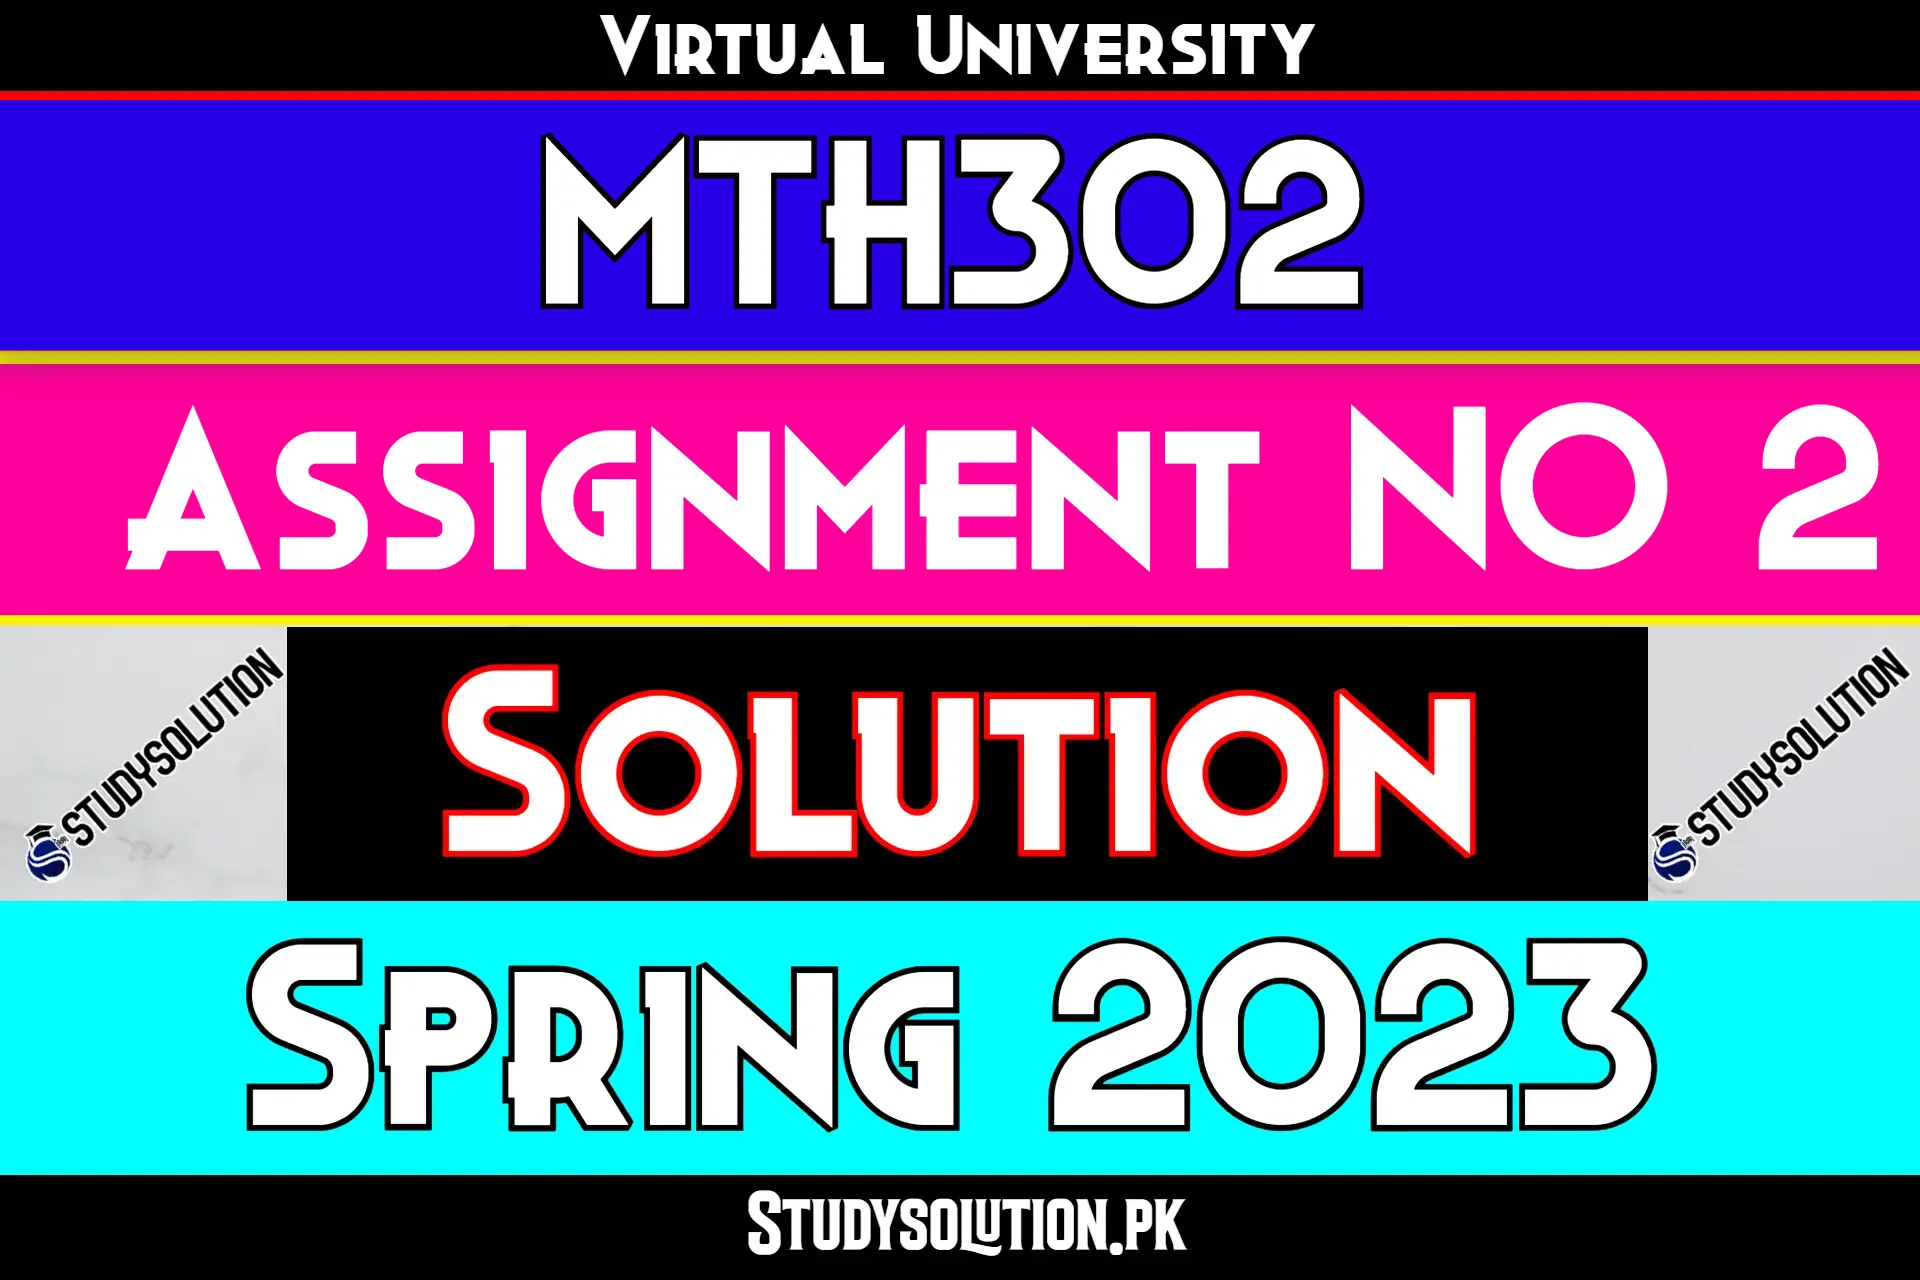 MTH302 Assignment No 2 Solution Spring 2023